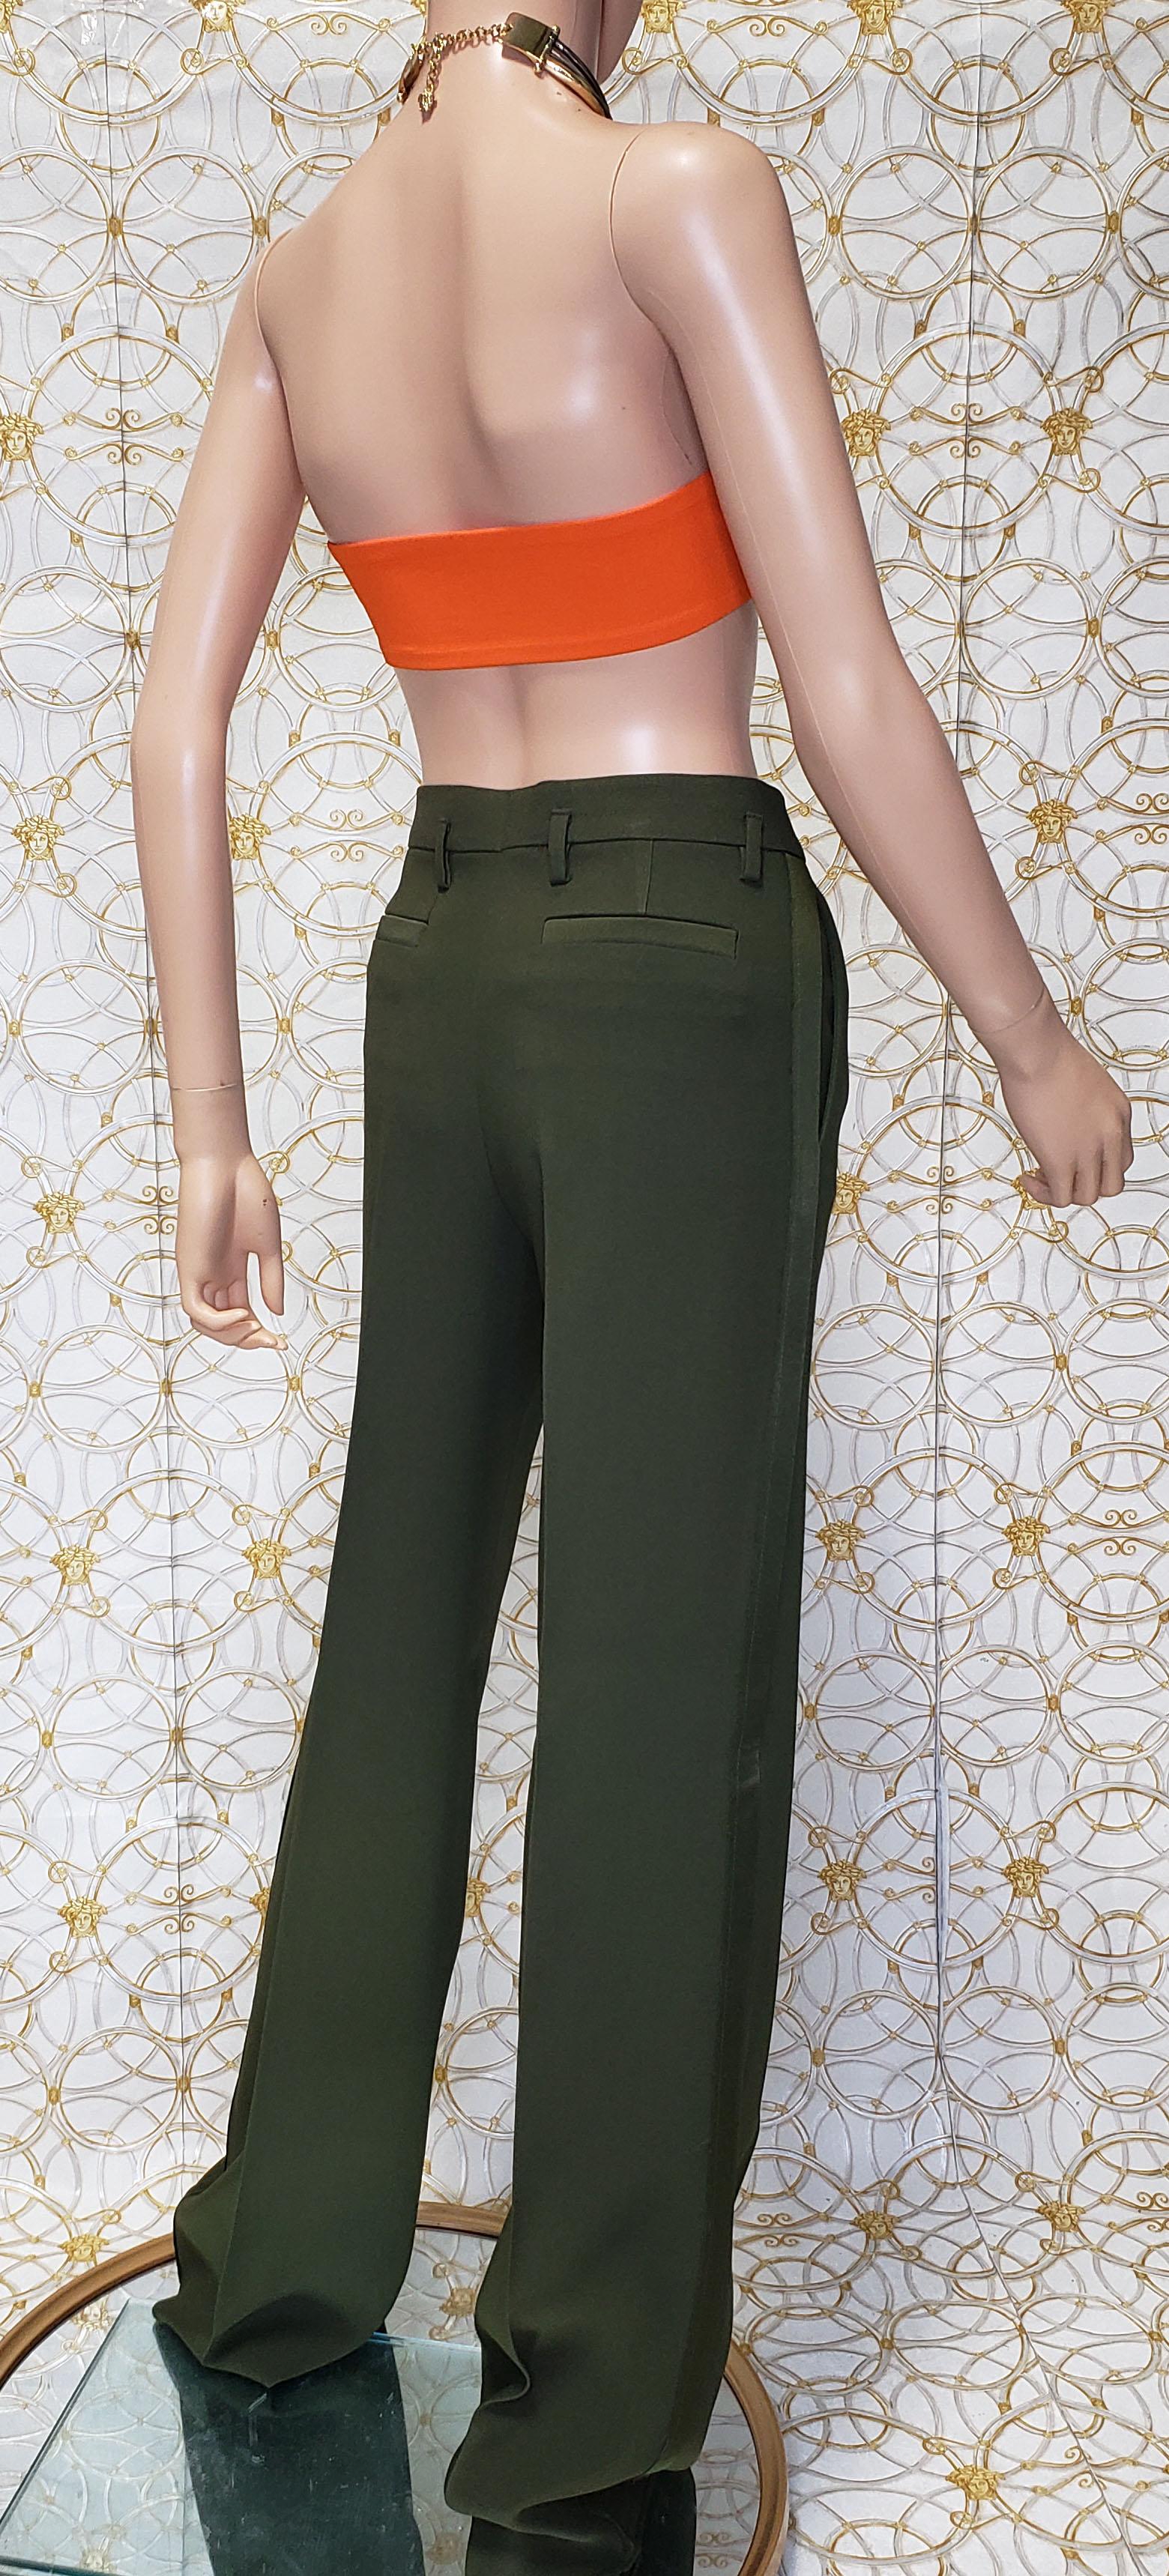 Black S/S 2016 Look # 43 VERSACE ARMY GREEN MILITARY PANTS size 38 - 2 For Sale